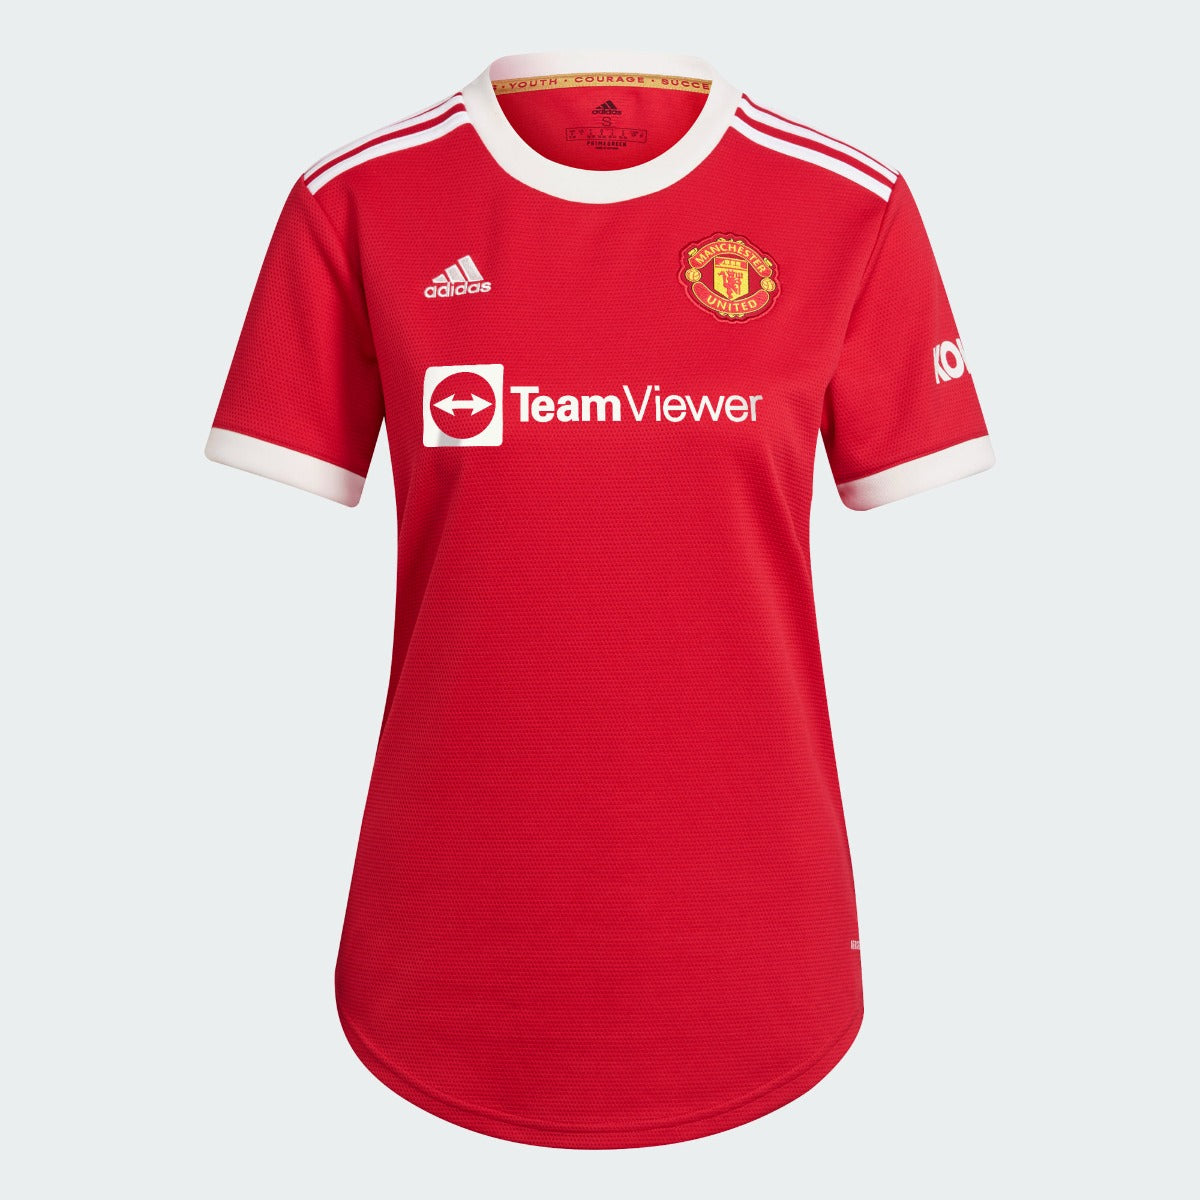 Adidas 2021-22 Manchester United Women Home Jersey - Red (Front)